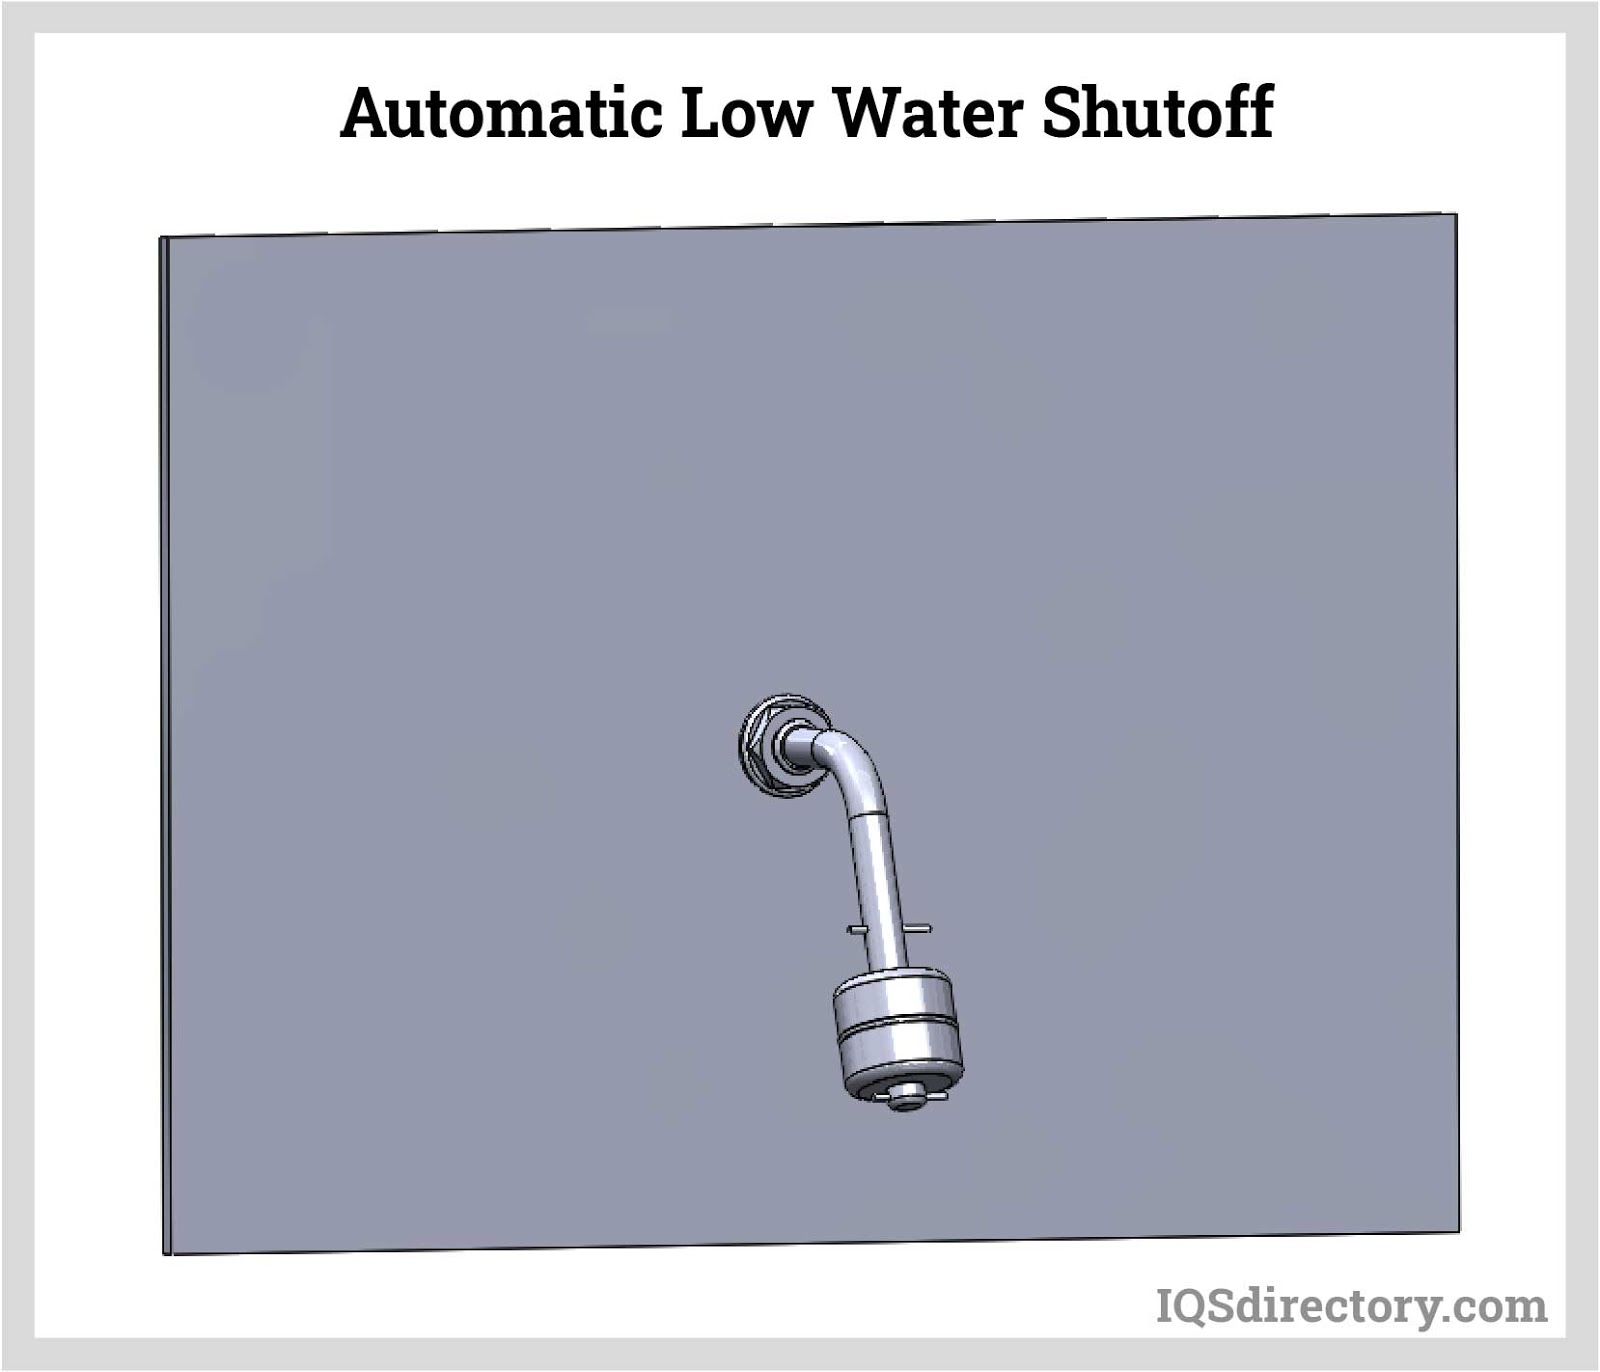 Automatic Low Water Shutoff